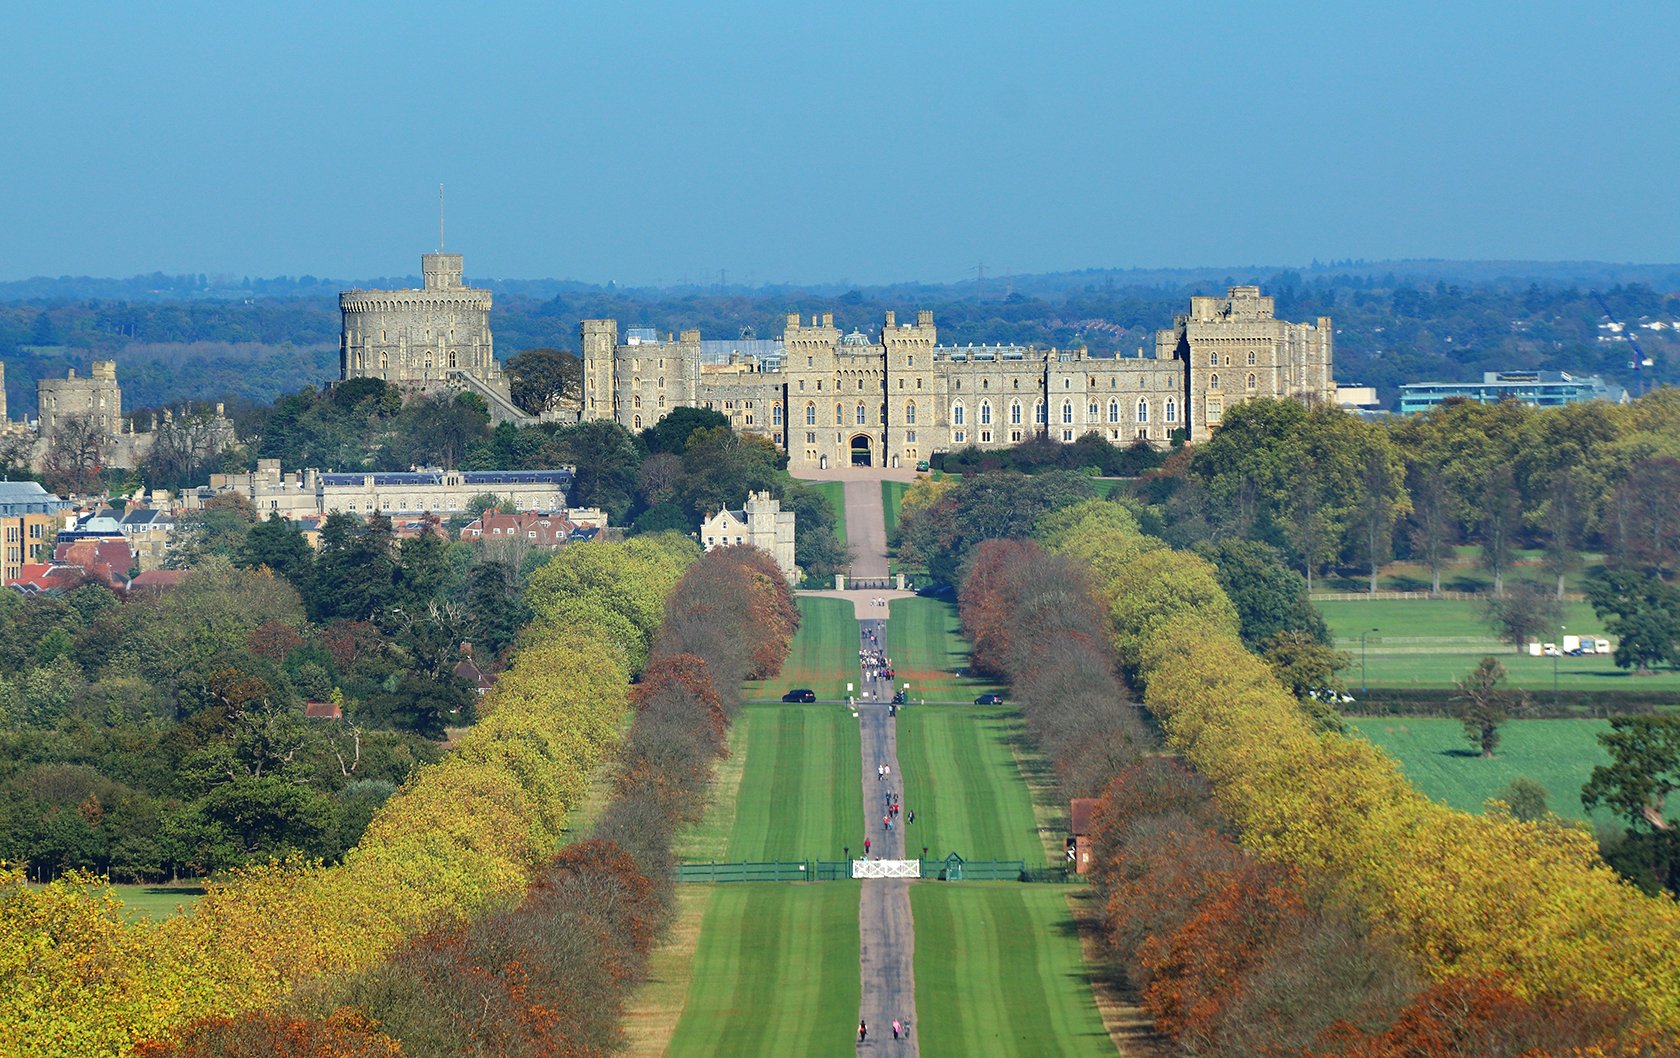 The Perfect Day Trip to Windsor Castle from London